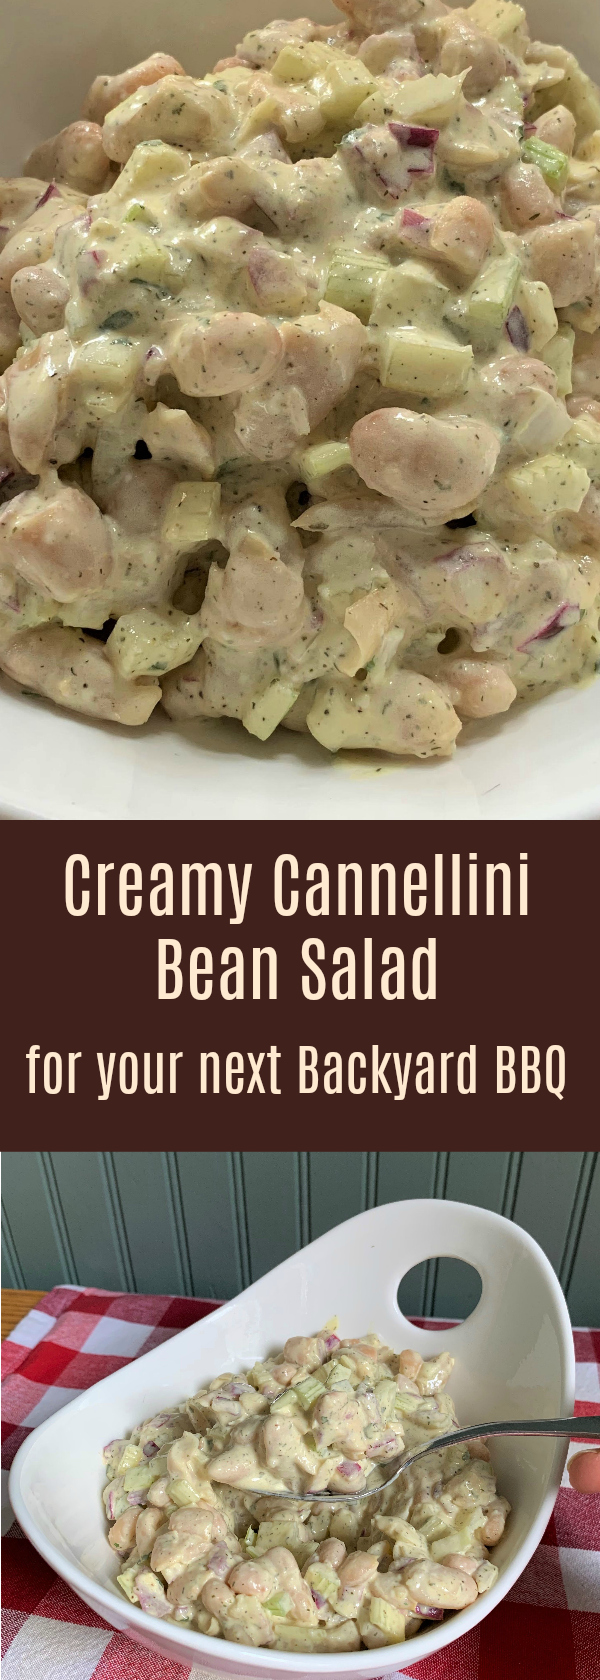 Creamy Cannellini Bean Salad for your next Backyard BBQ - Keeping It Real. This recipe is Dairy Free and is Naturally Gluten Free and Vegetarian